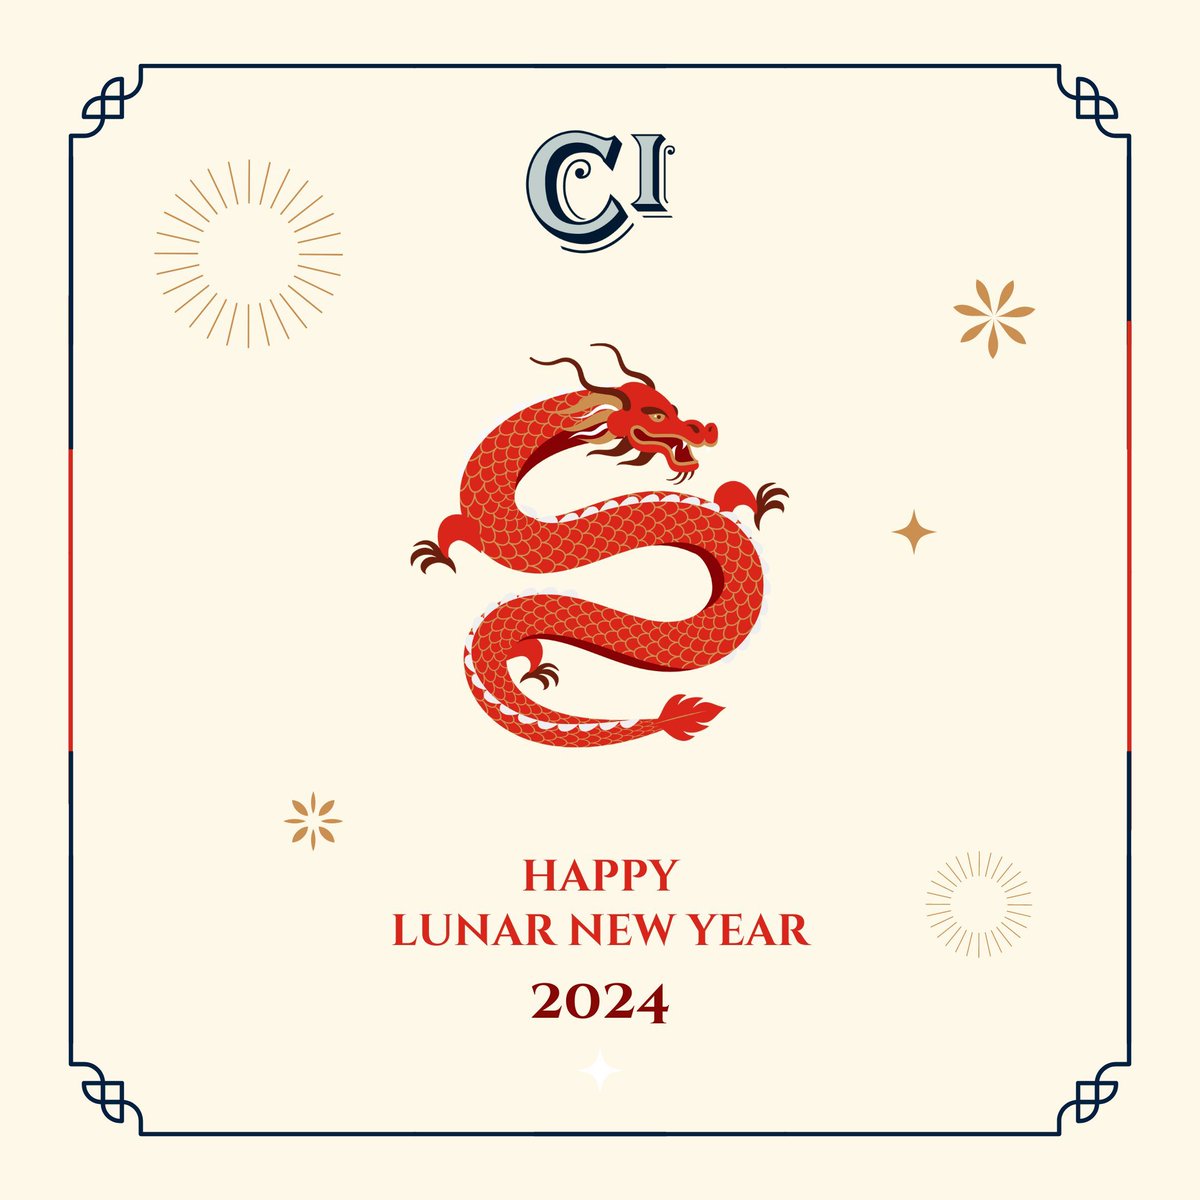 Welcoming the Lunar New Year with open hearts! Here's to a prosperous, healthy, and joyful Year of the Dragon.